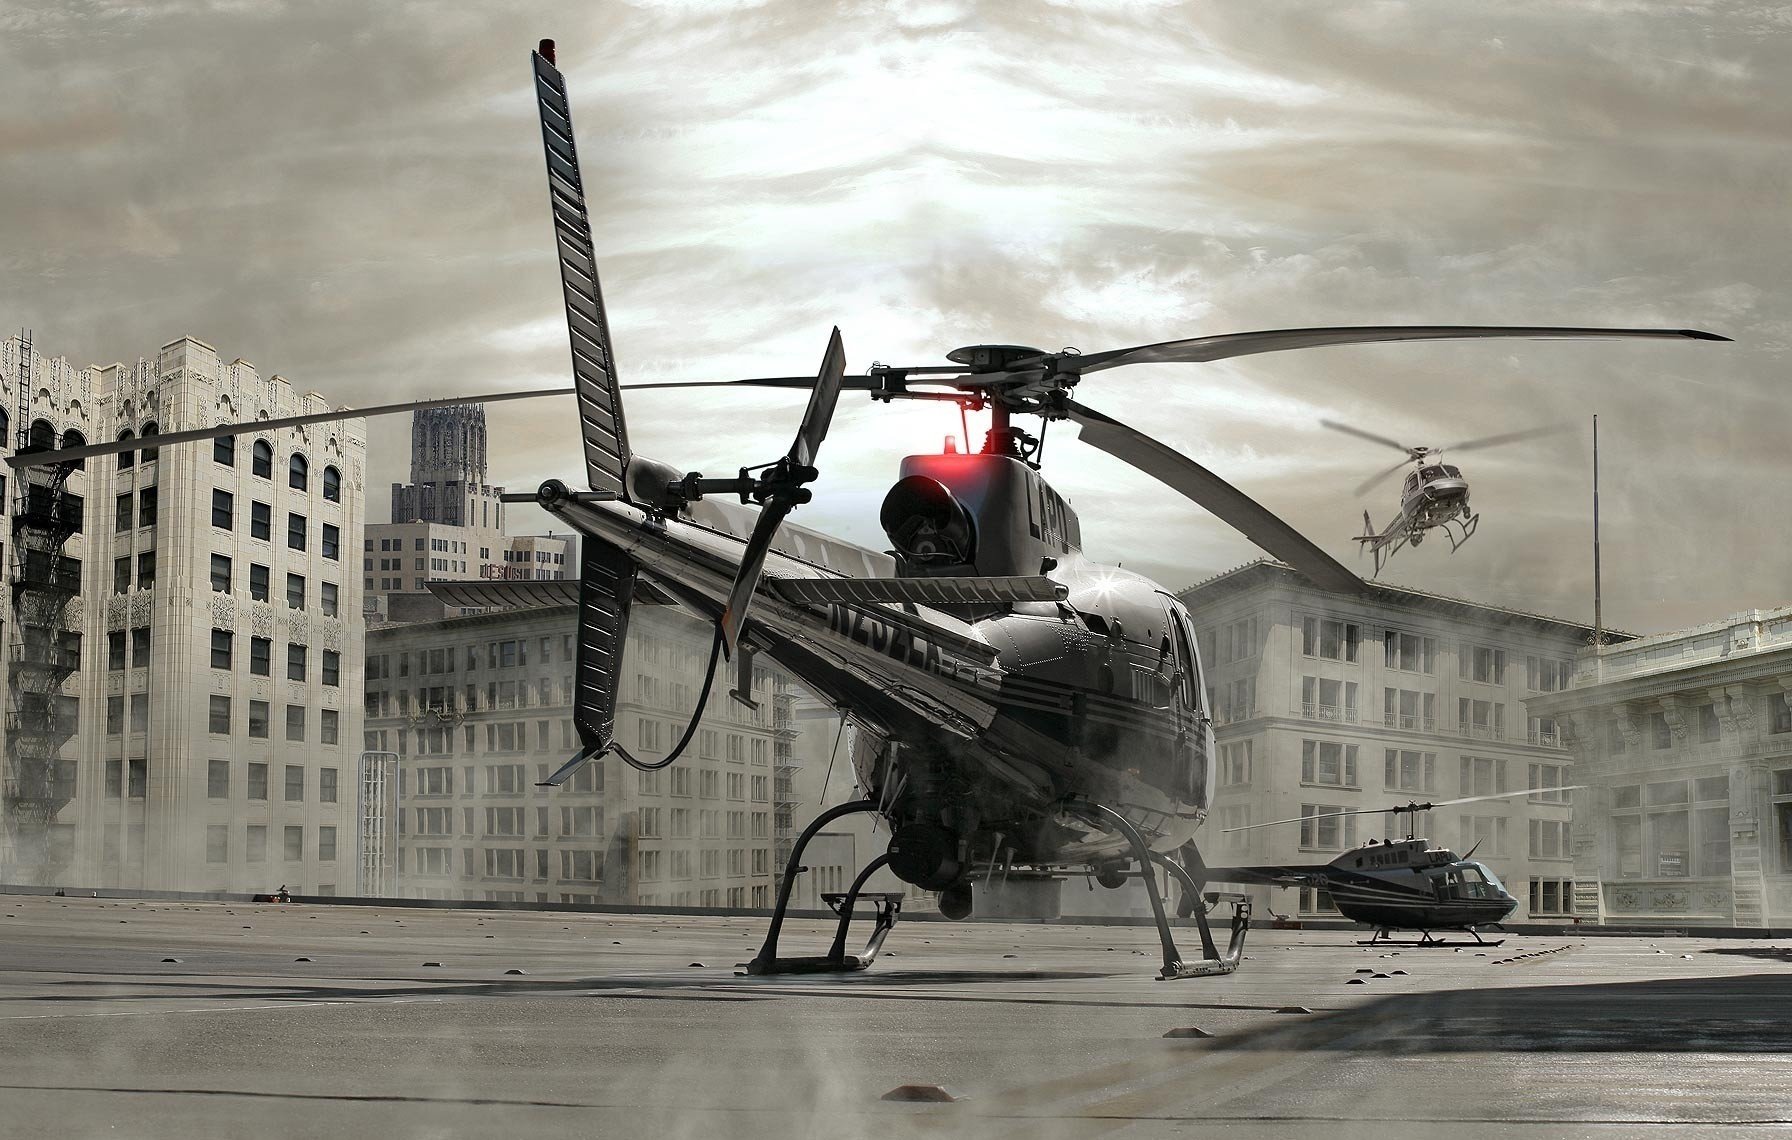 Helicopters in the center of an empty city